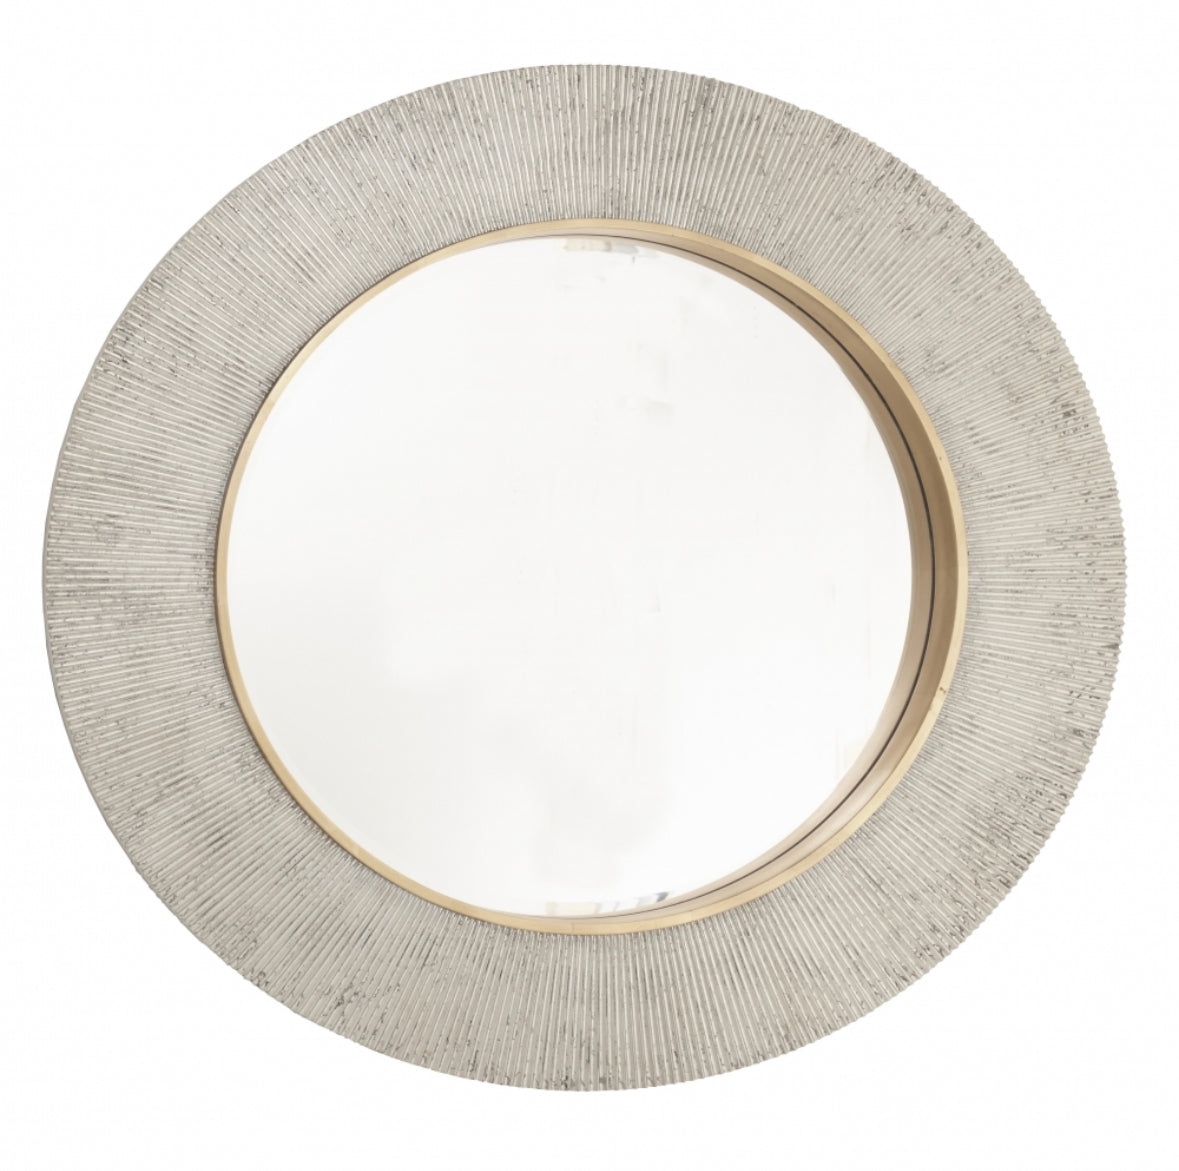 Edvin Silver Finish Wall Mirror by RV Astley